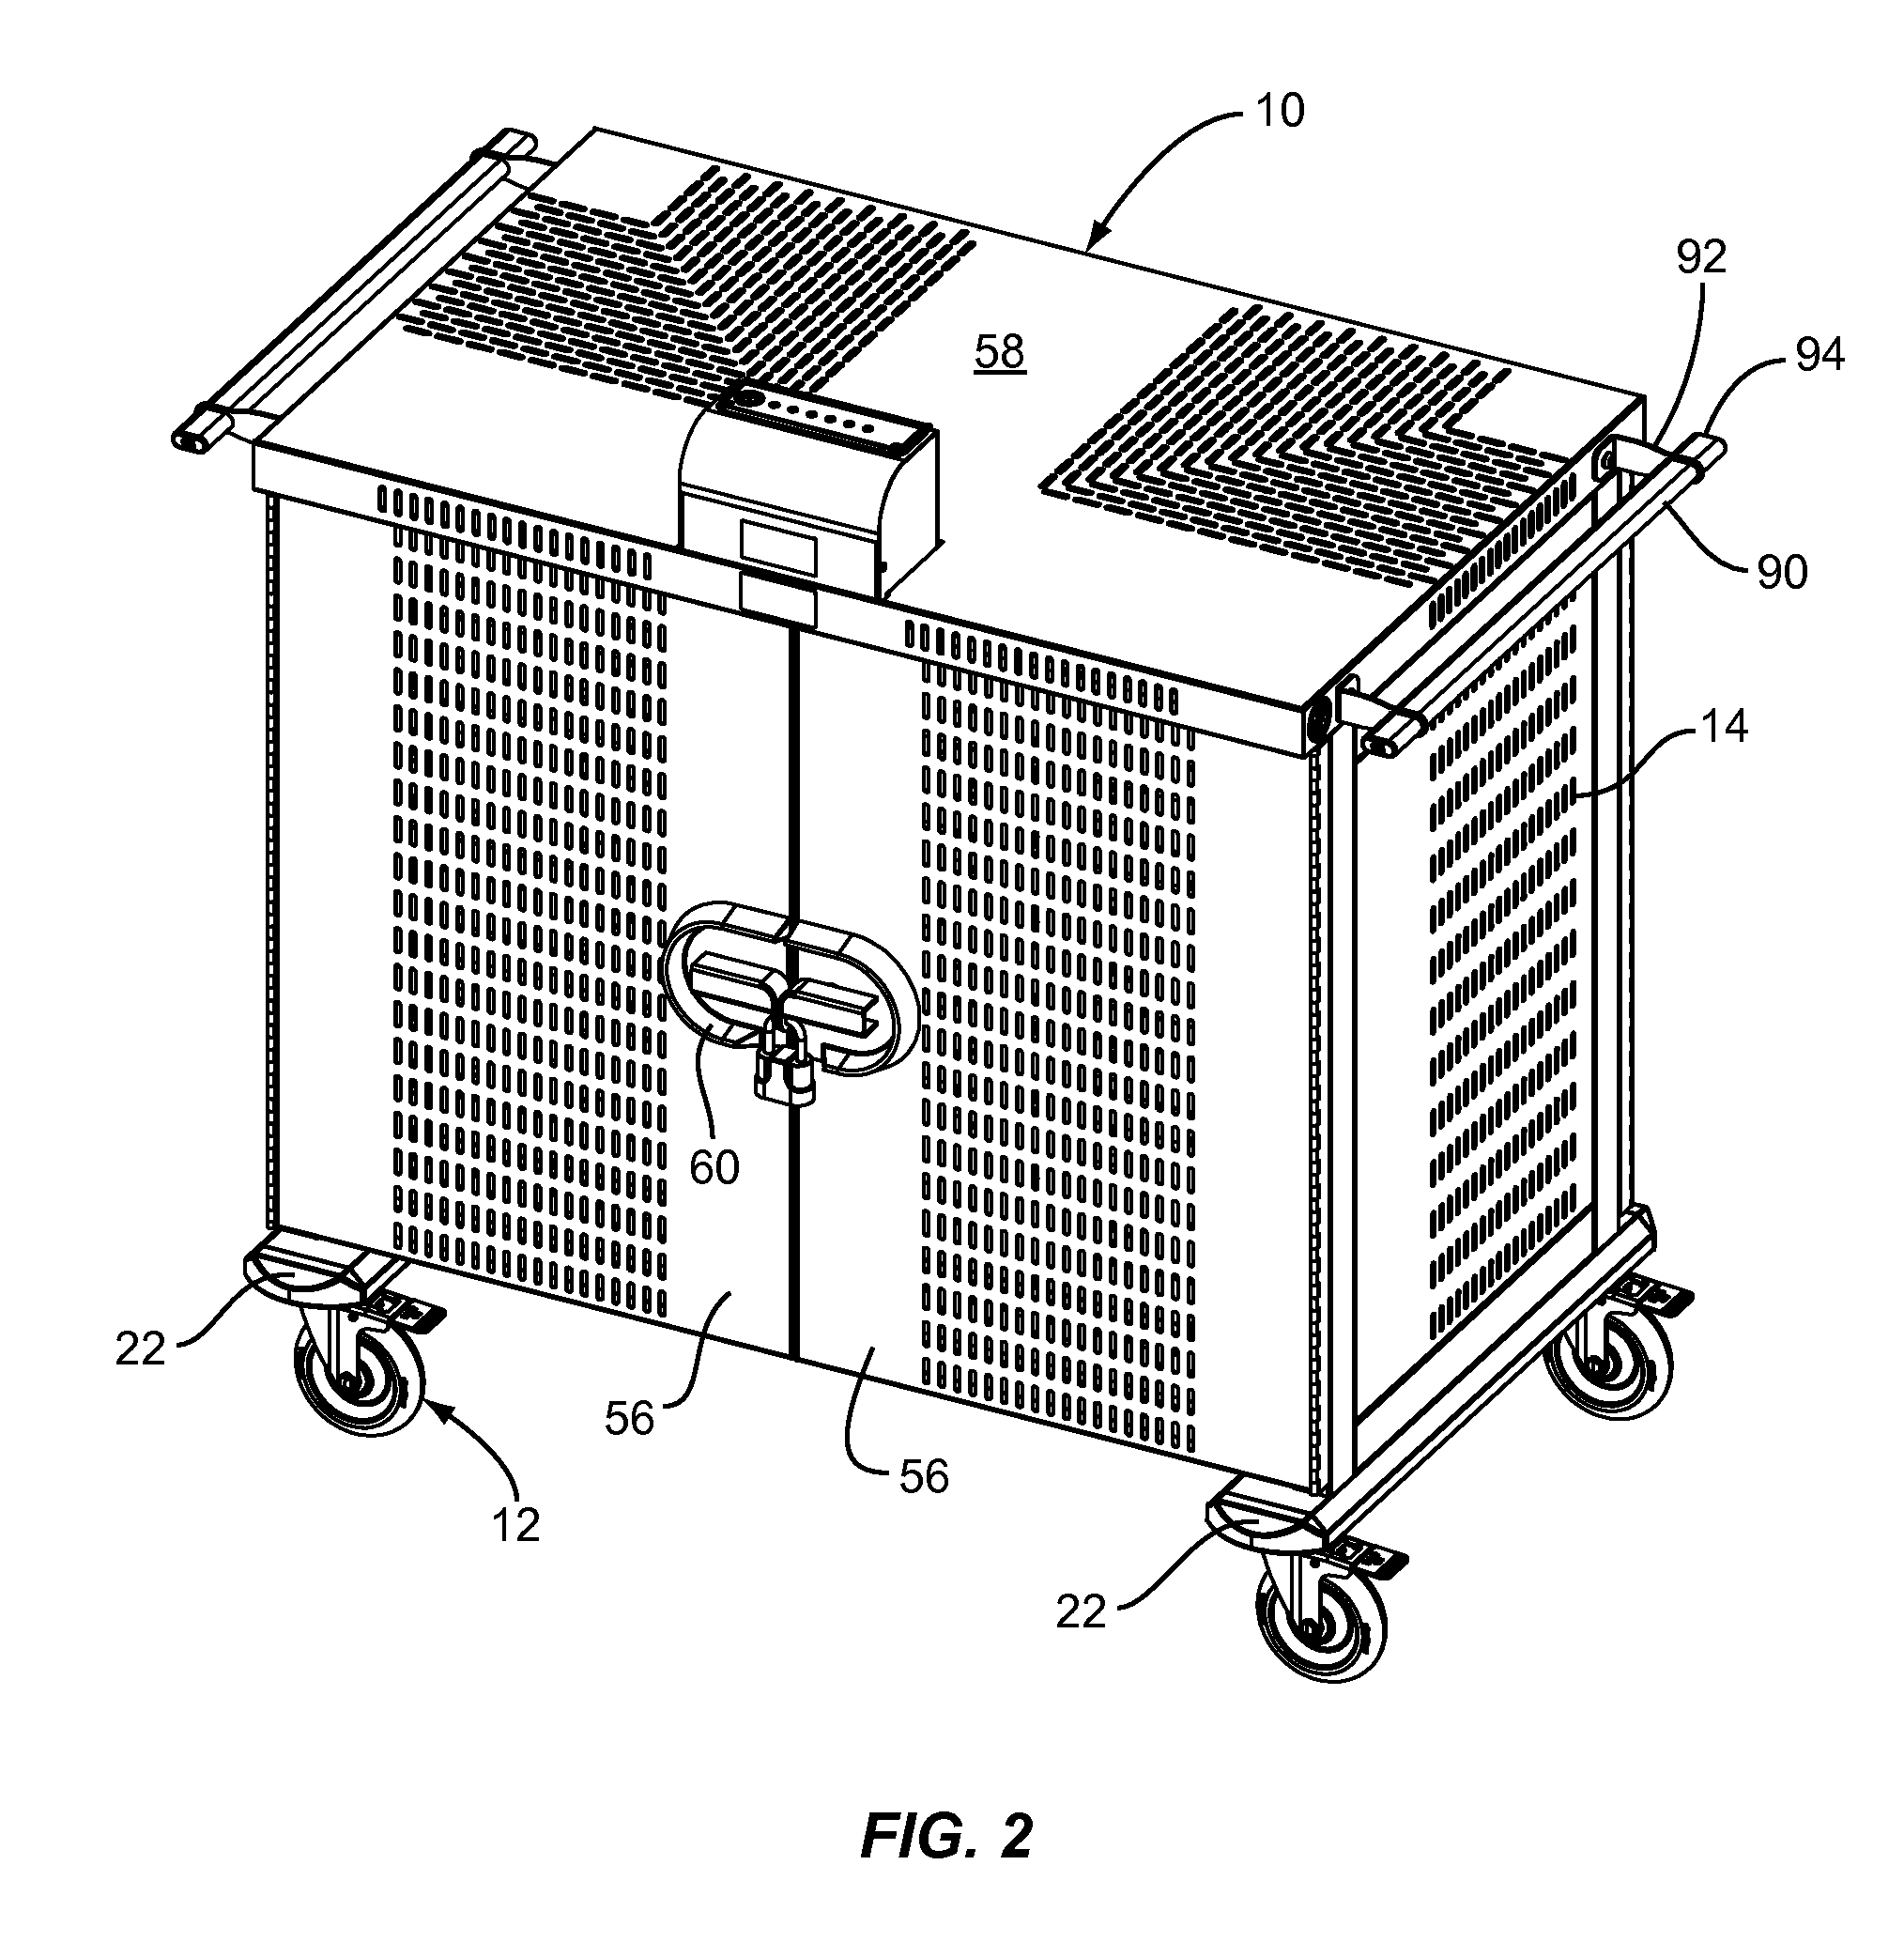 Electrical System for a Computer Cart